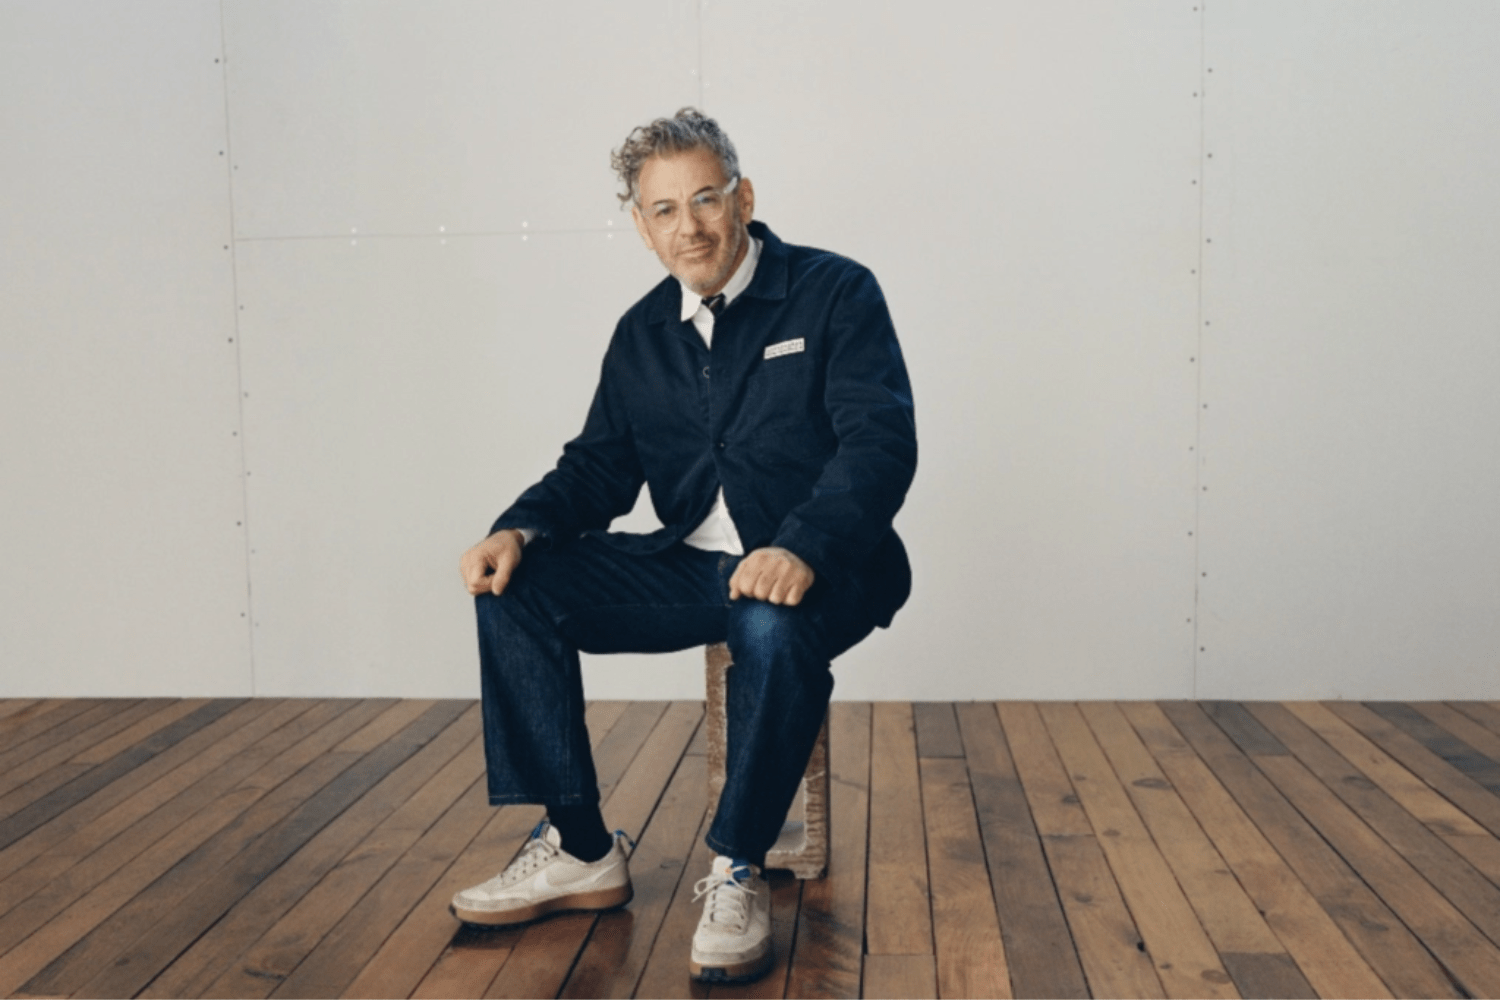 Tom Sachs and Nike are no longer working together